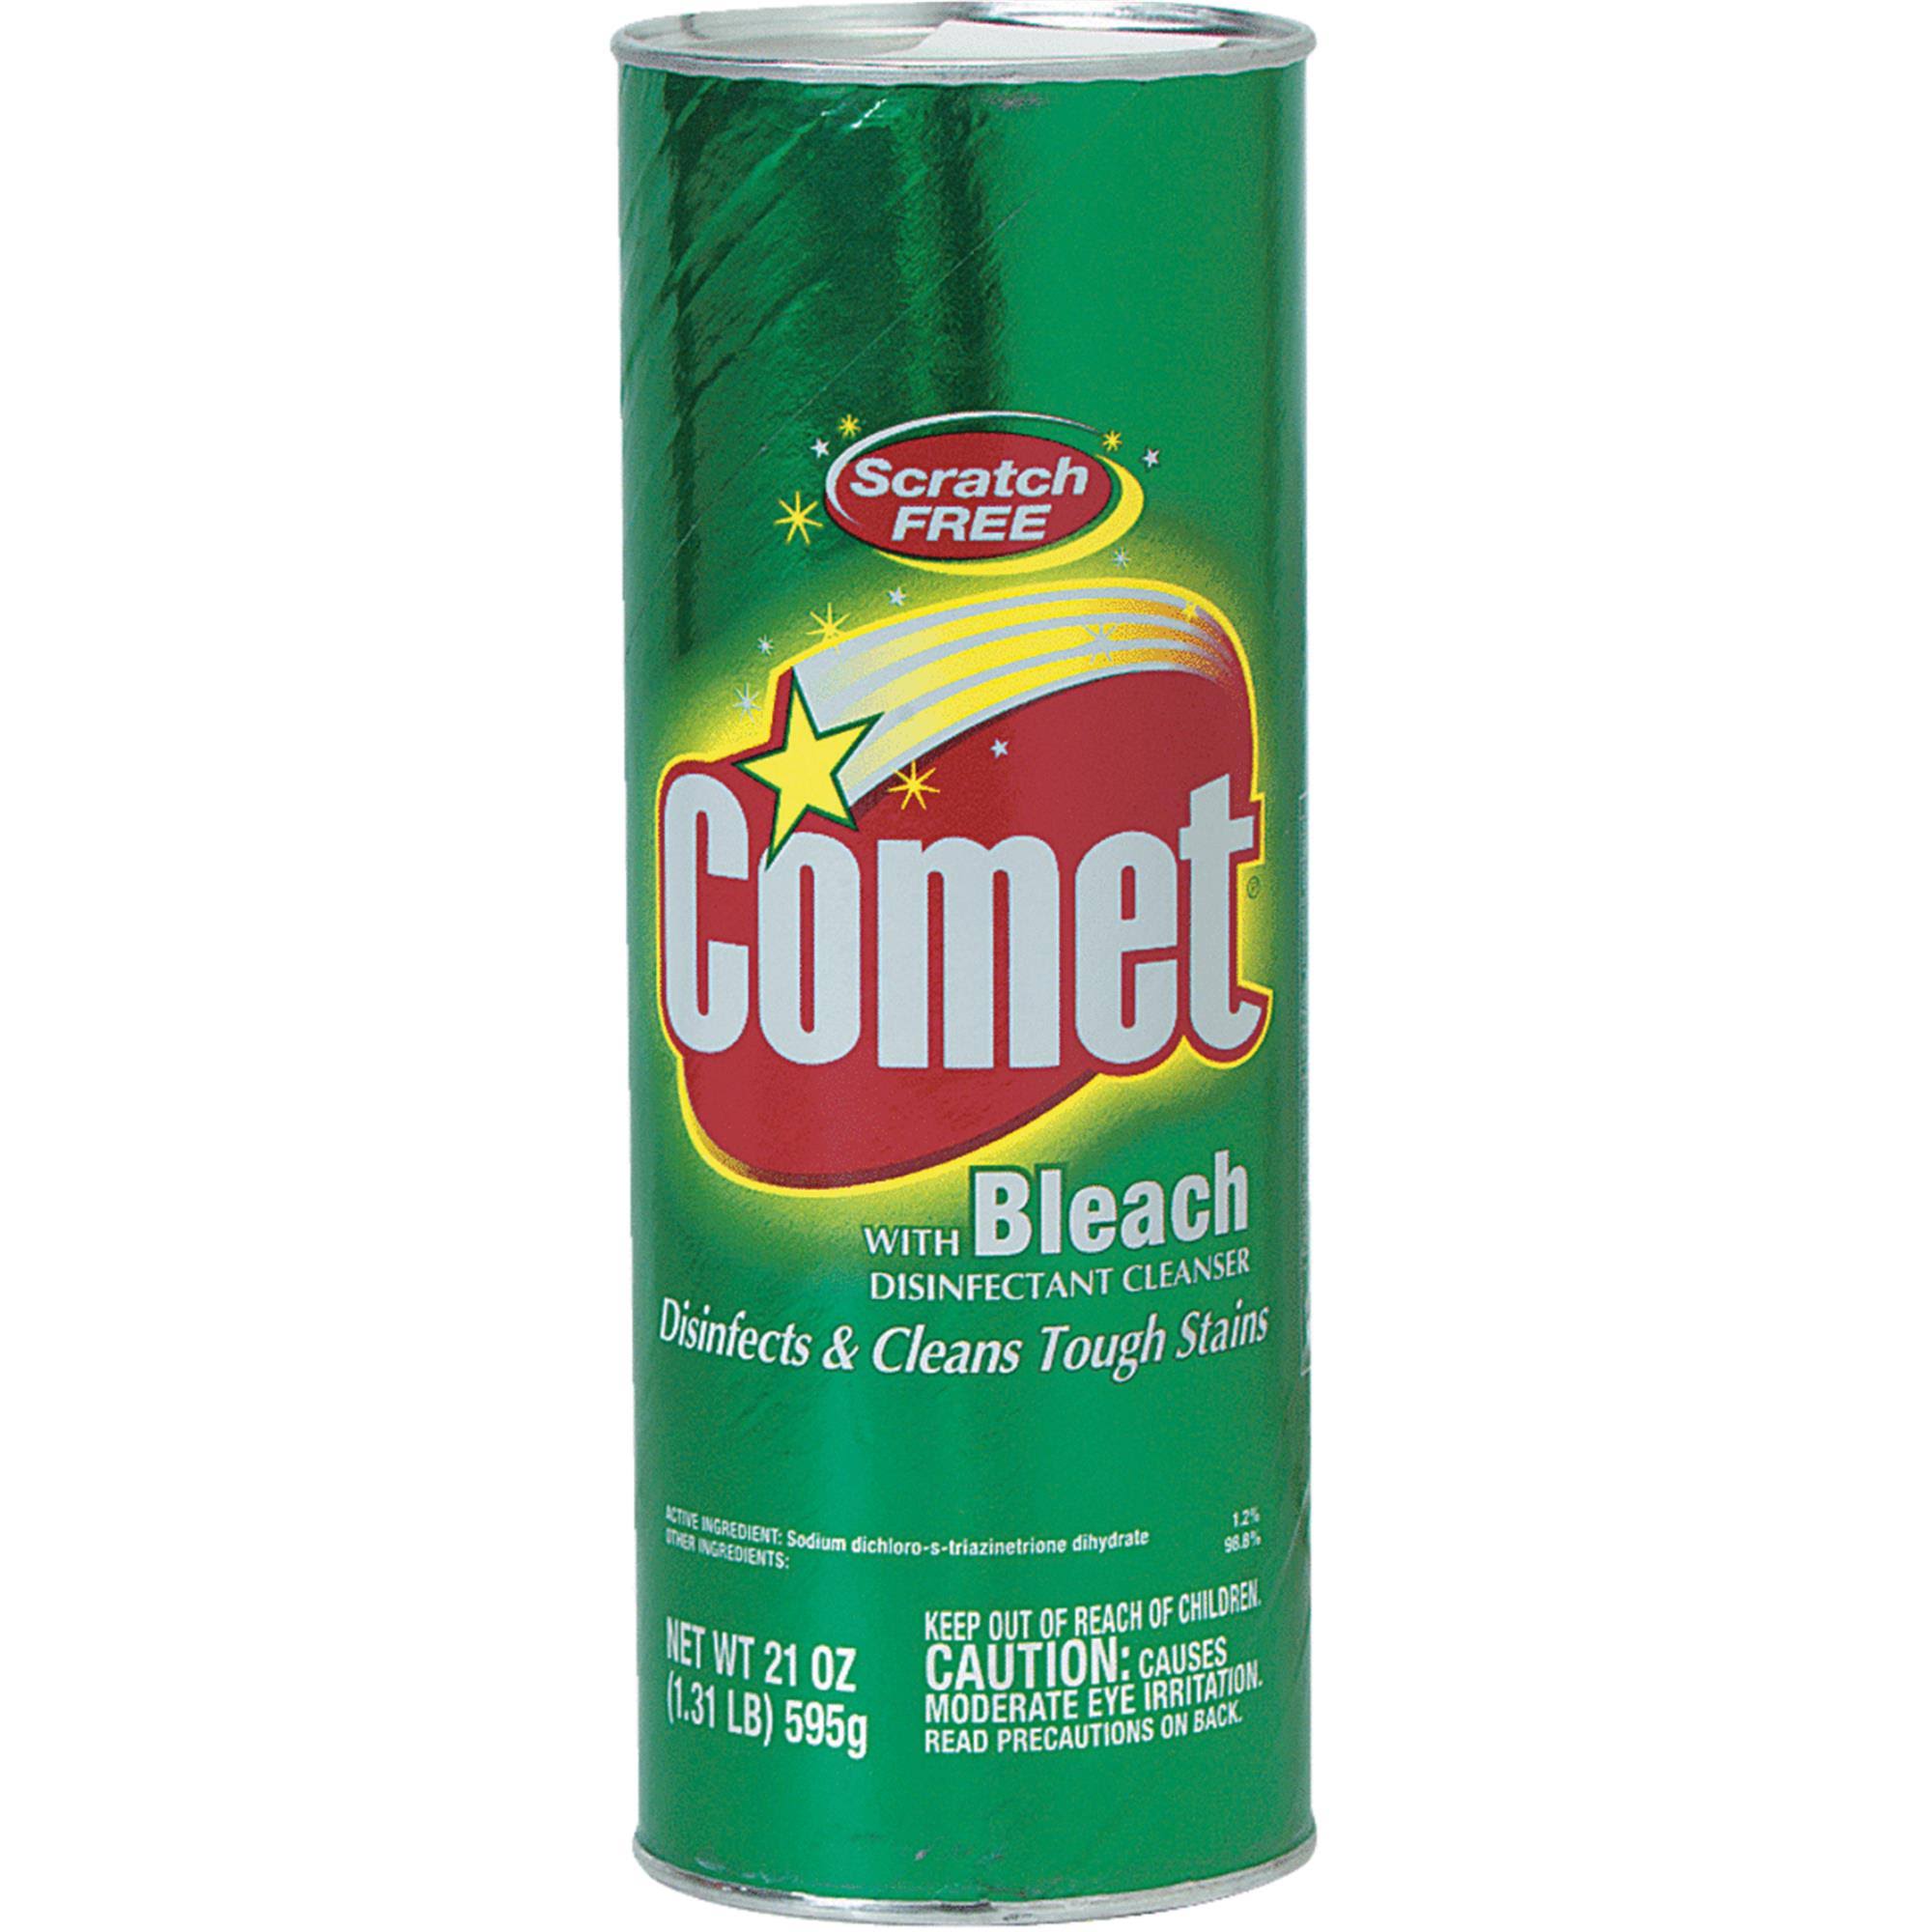 Comet 21 oz. Powder Cleaner with Bleach 85749608811